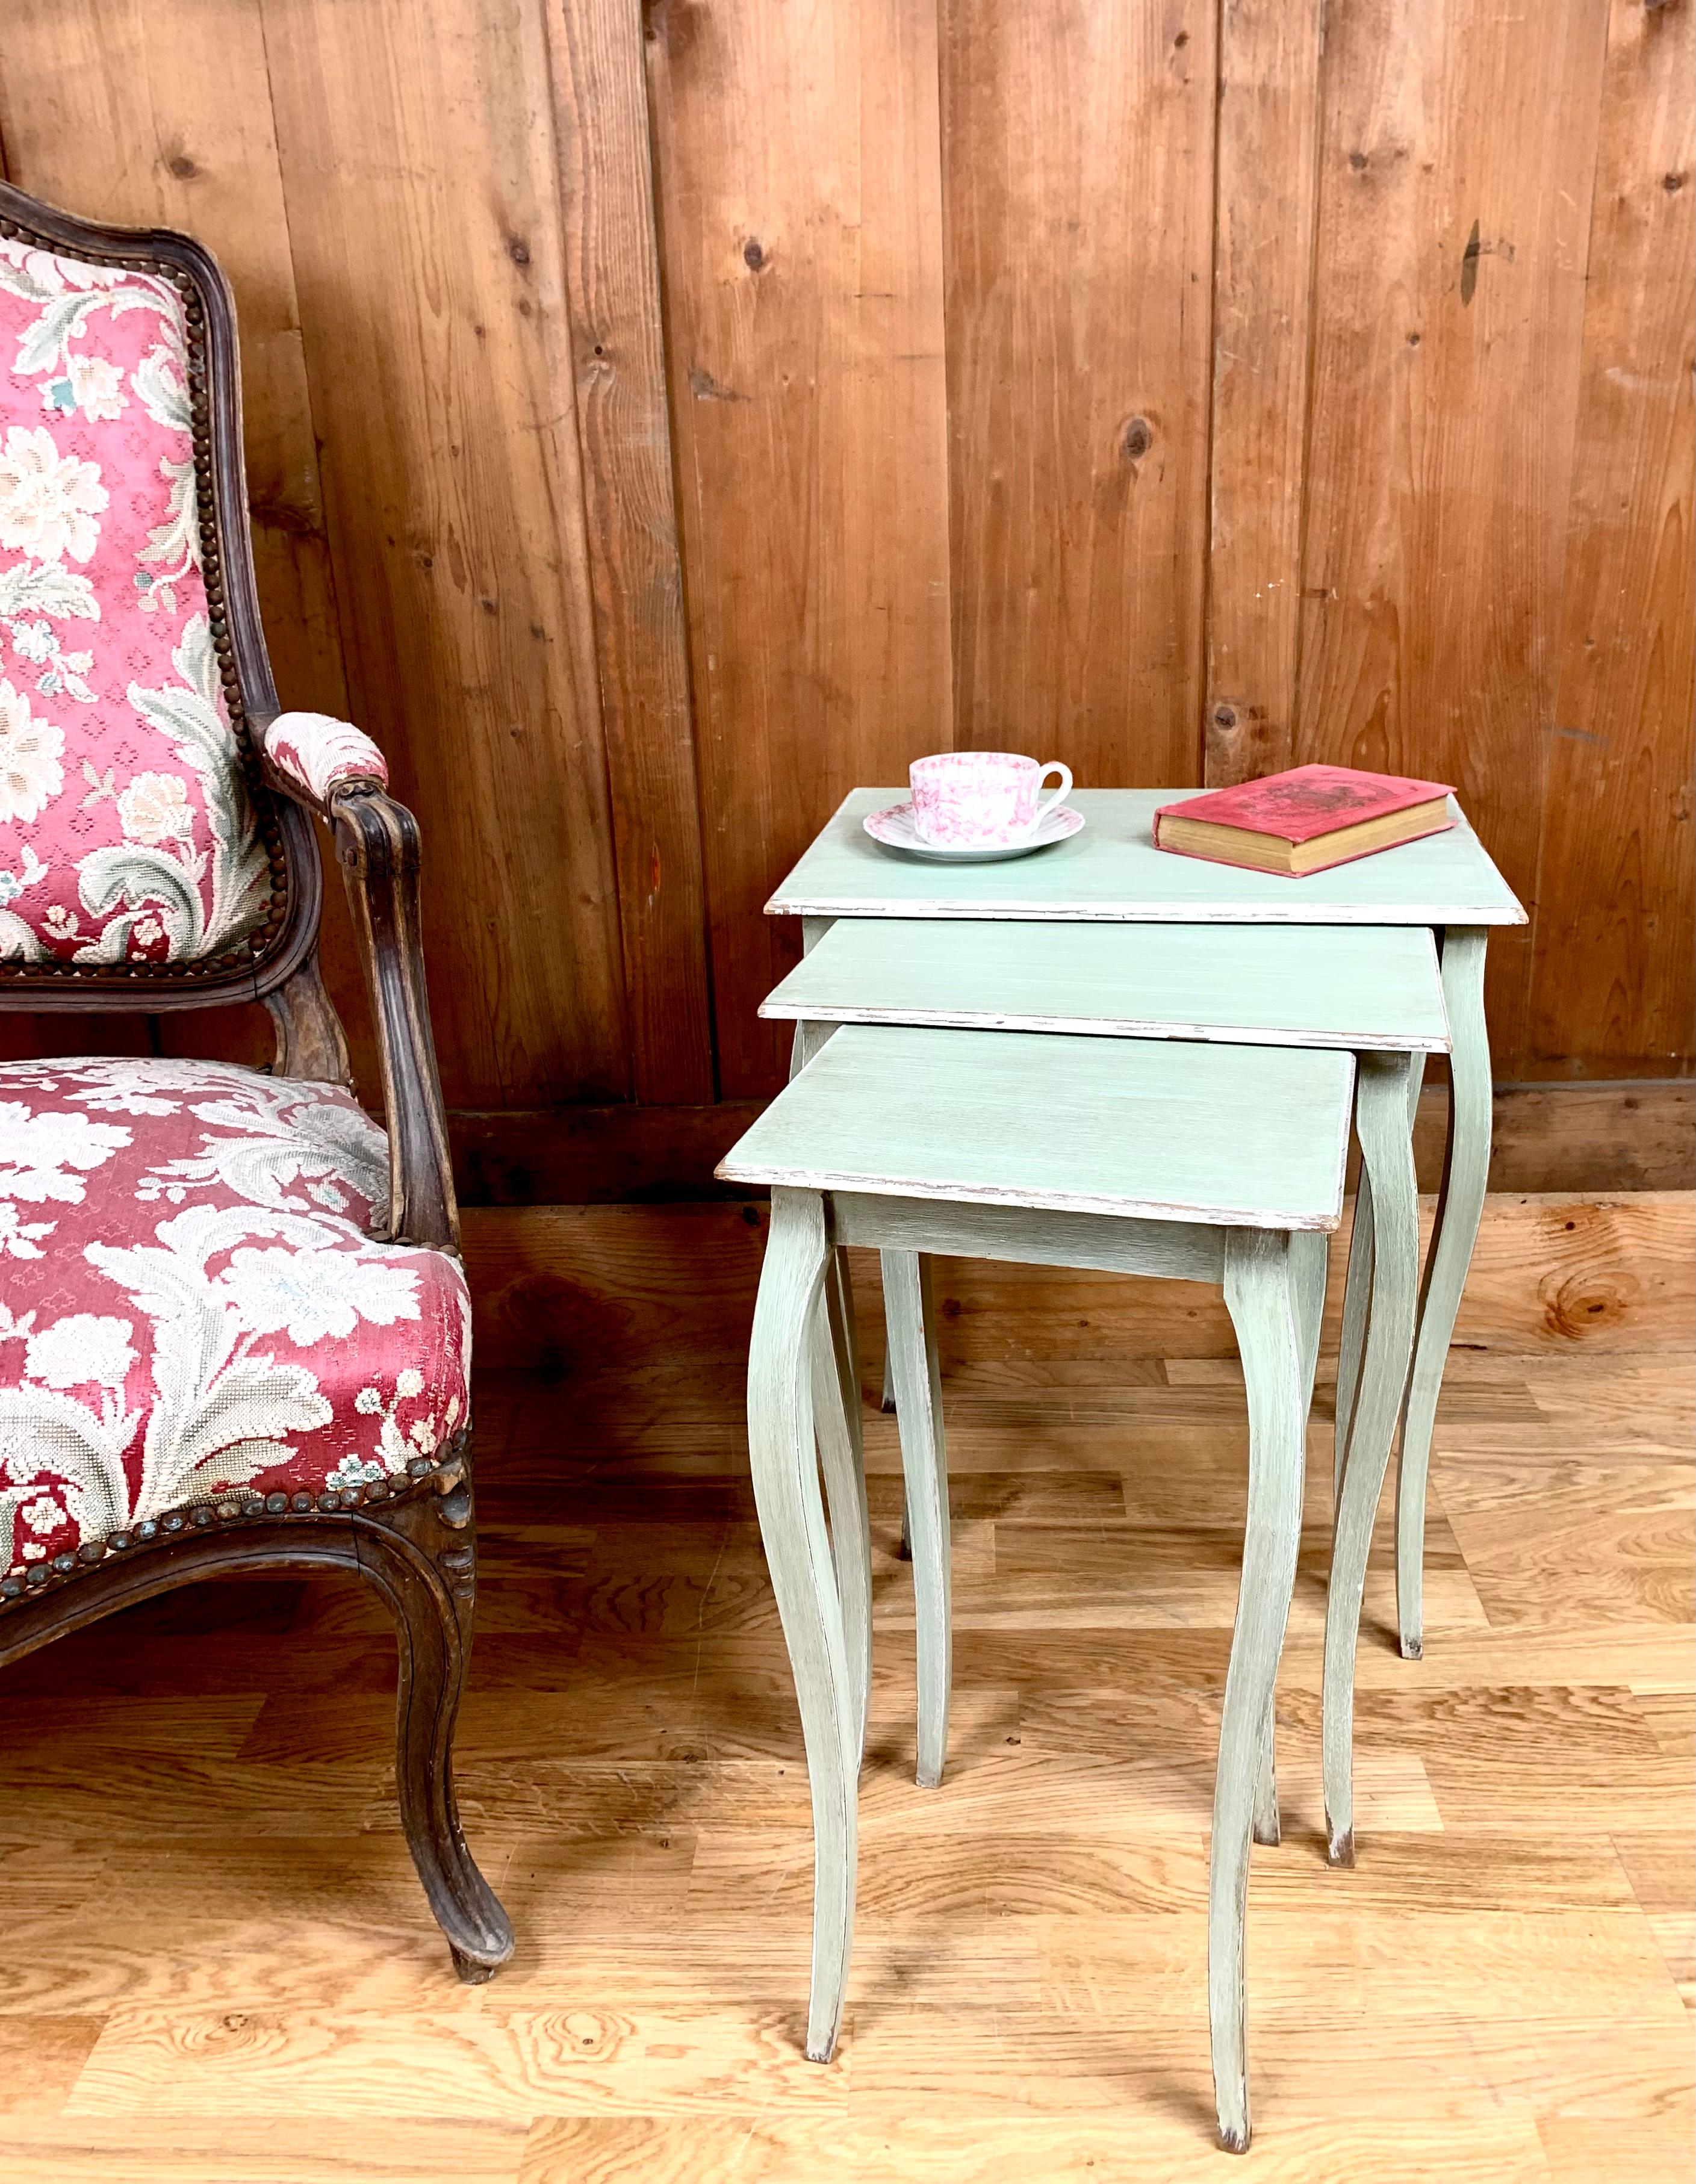 Set of 3 vintage nesting tables. The legs are thin and curved, inspired by Louis 15 style, giving them elegance and lightness. The set is patinated in blue-gray tones. 

France
XXth century 

Large one : 
D : 32.5 cm 
W : 47.5 cm 
H :